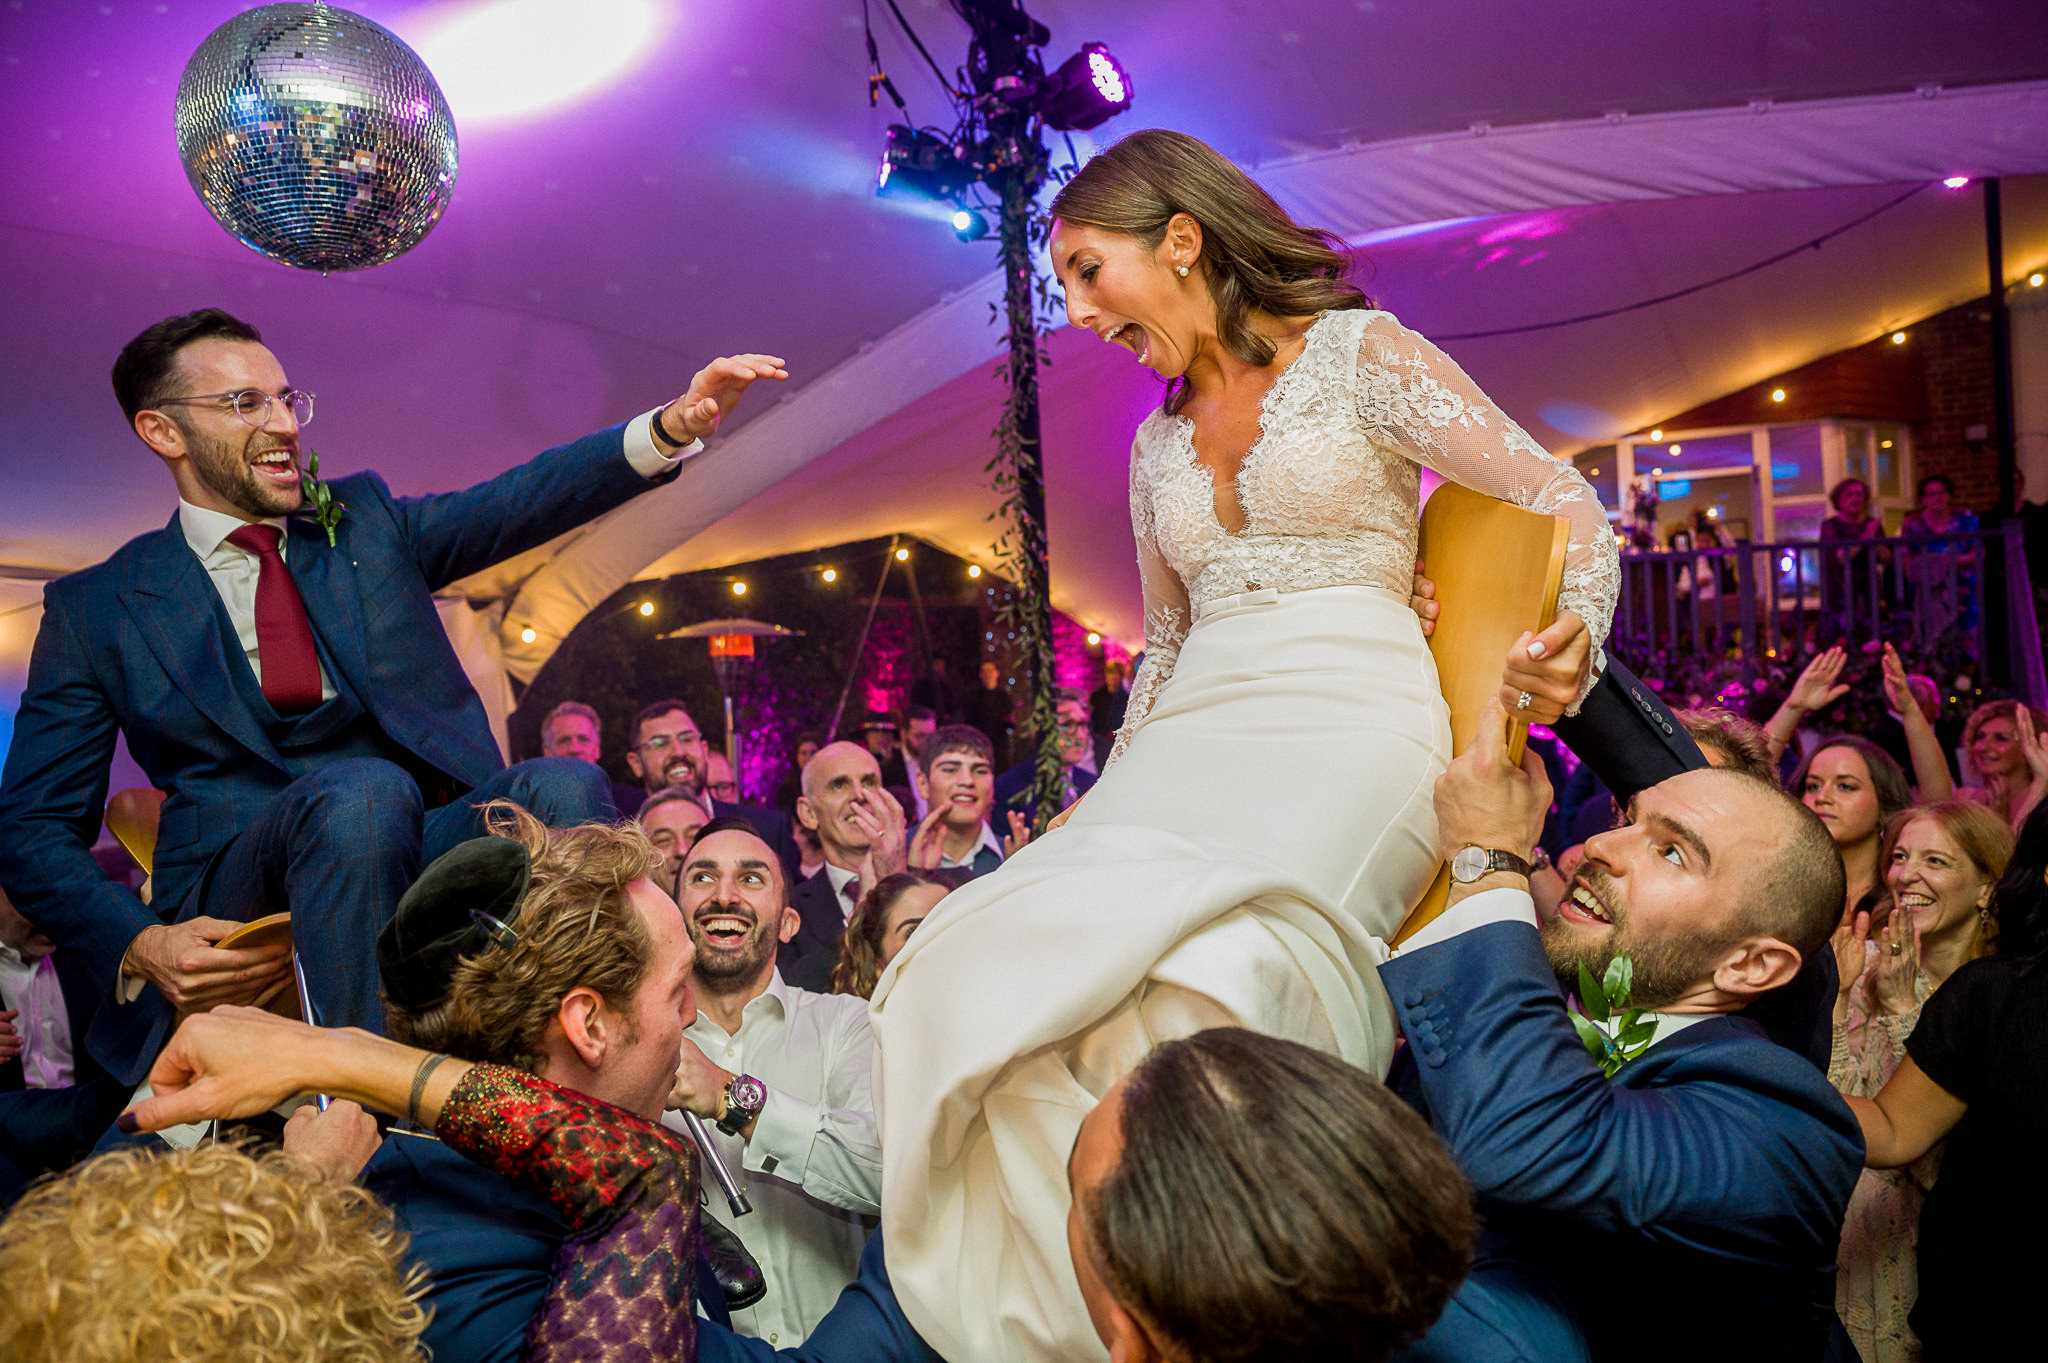 Jewish bride and groom up in the air on the chairs during Israeli dance